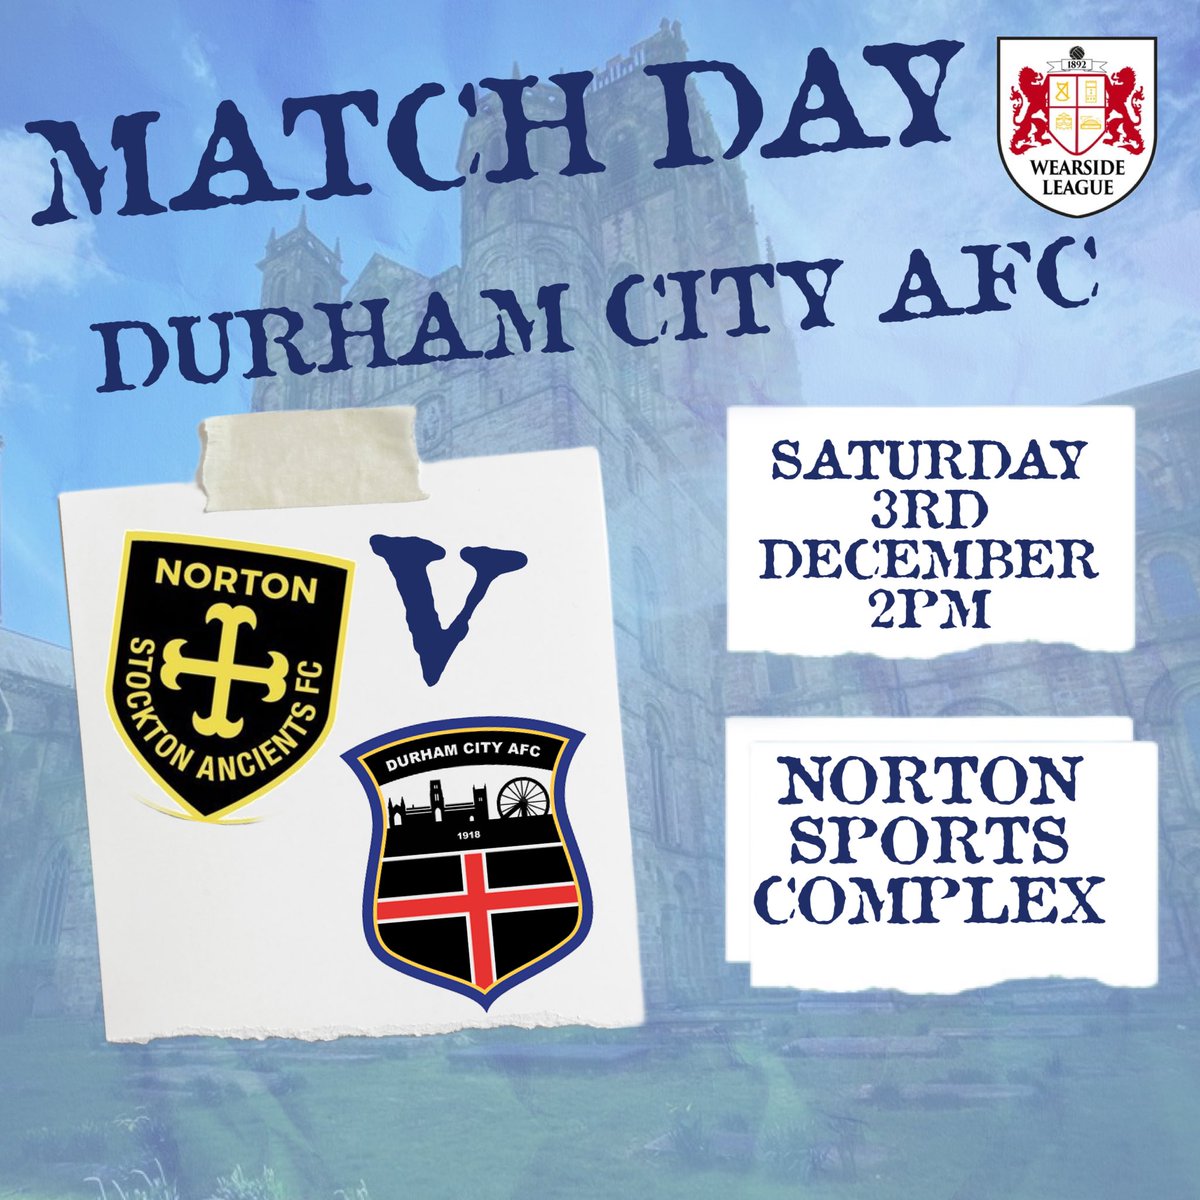 Todays the day! 📆 Saturday 3rd December ⏰ 2pm KO 🆚 @NortonFirst 🏟 Norton Sports Complex, Stockton-On-Tees, TS20 1PE 🎟 £3 Adults £1 Concessions #TheCitizens #DurhamCityAFC #DCAFC